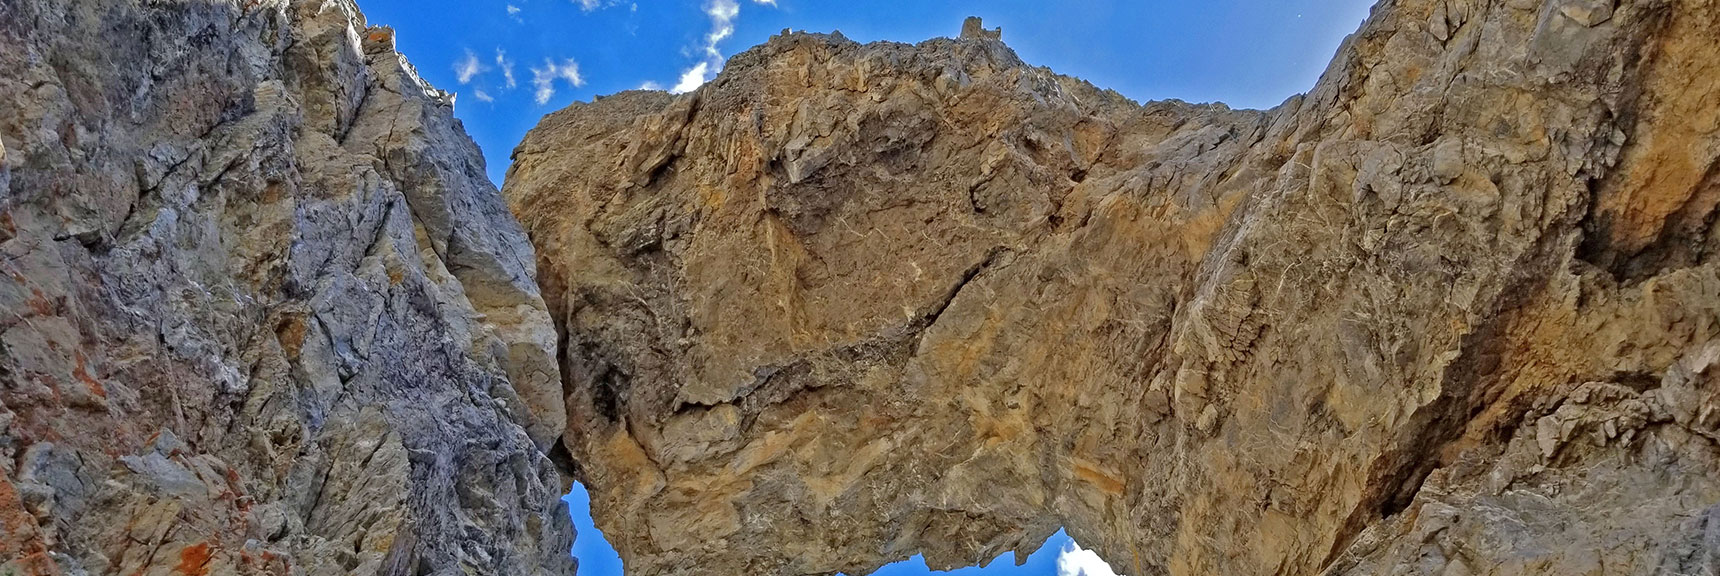 Natural Arch Roof | Black Rock Sister | Mt Charleston Wilderness | Lee Canyon | Spring Mountains, Nevada